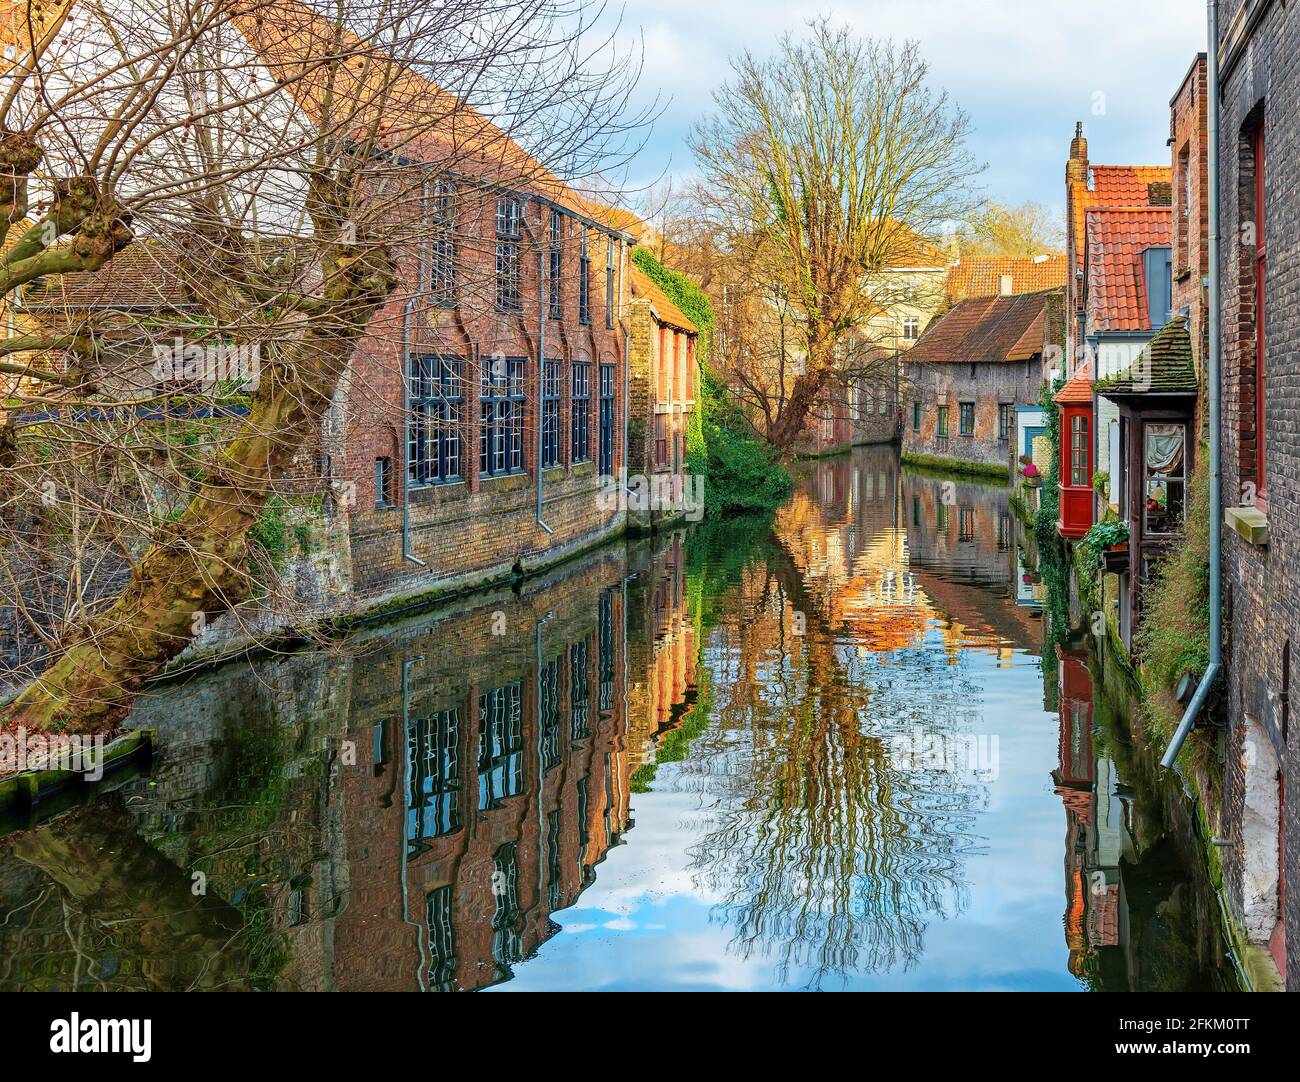 Bruges (Brugge) canal at sunset with medieval architecture, West Flanders, Belgium. Stock Photo